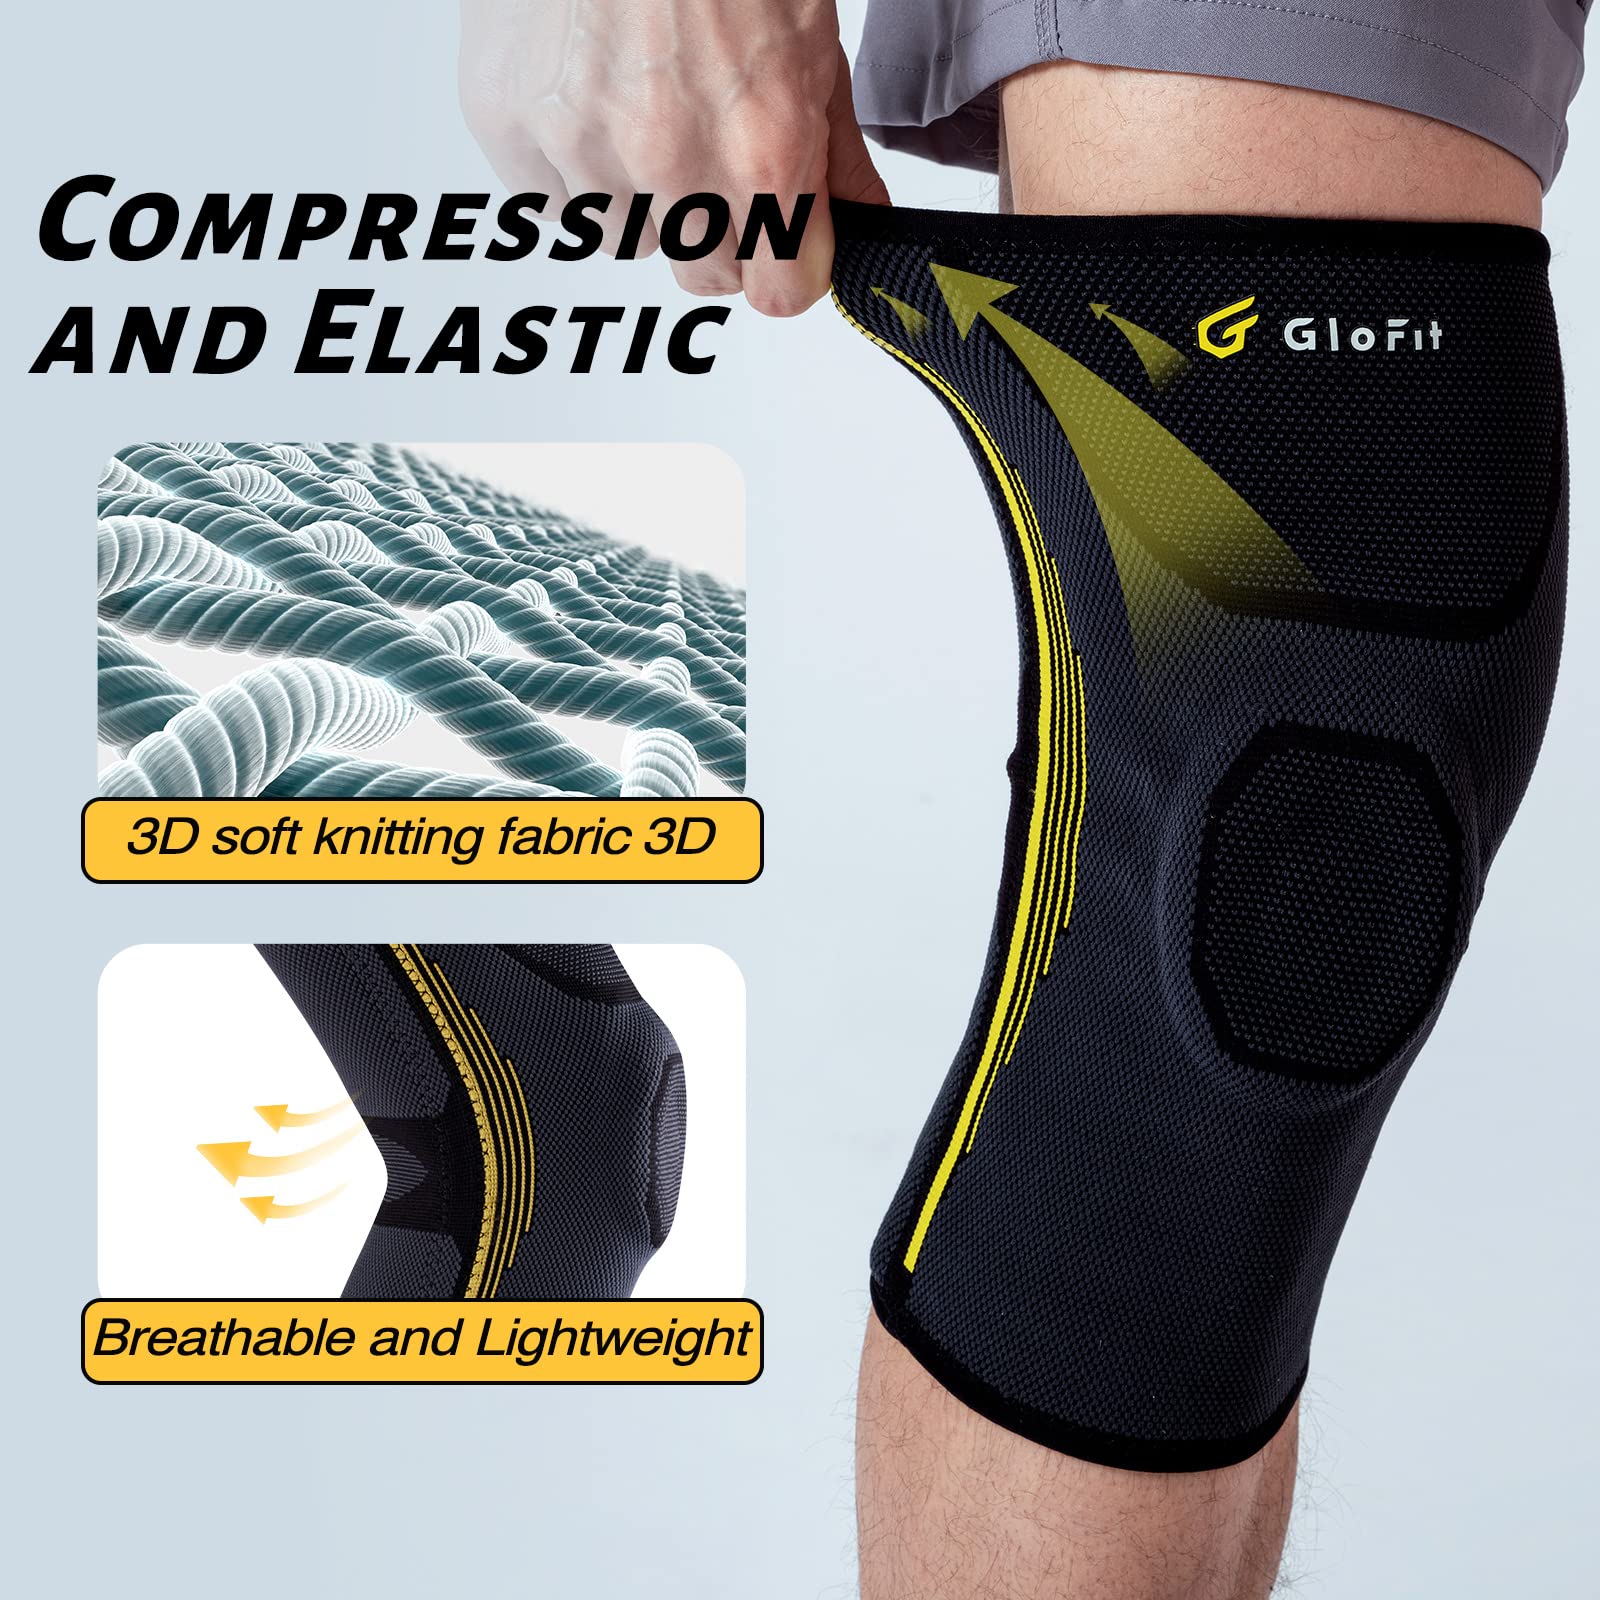 Glofit Professional Knee Brace, Compression Knee Sleeve with Patella Gel Pad & Side Stabilizers, Knee Support Bandage for Pain Relief, Medical Knee Pad